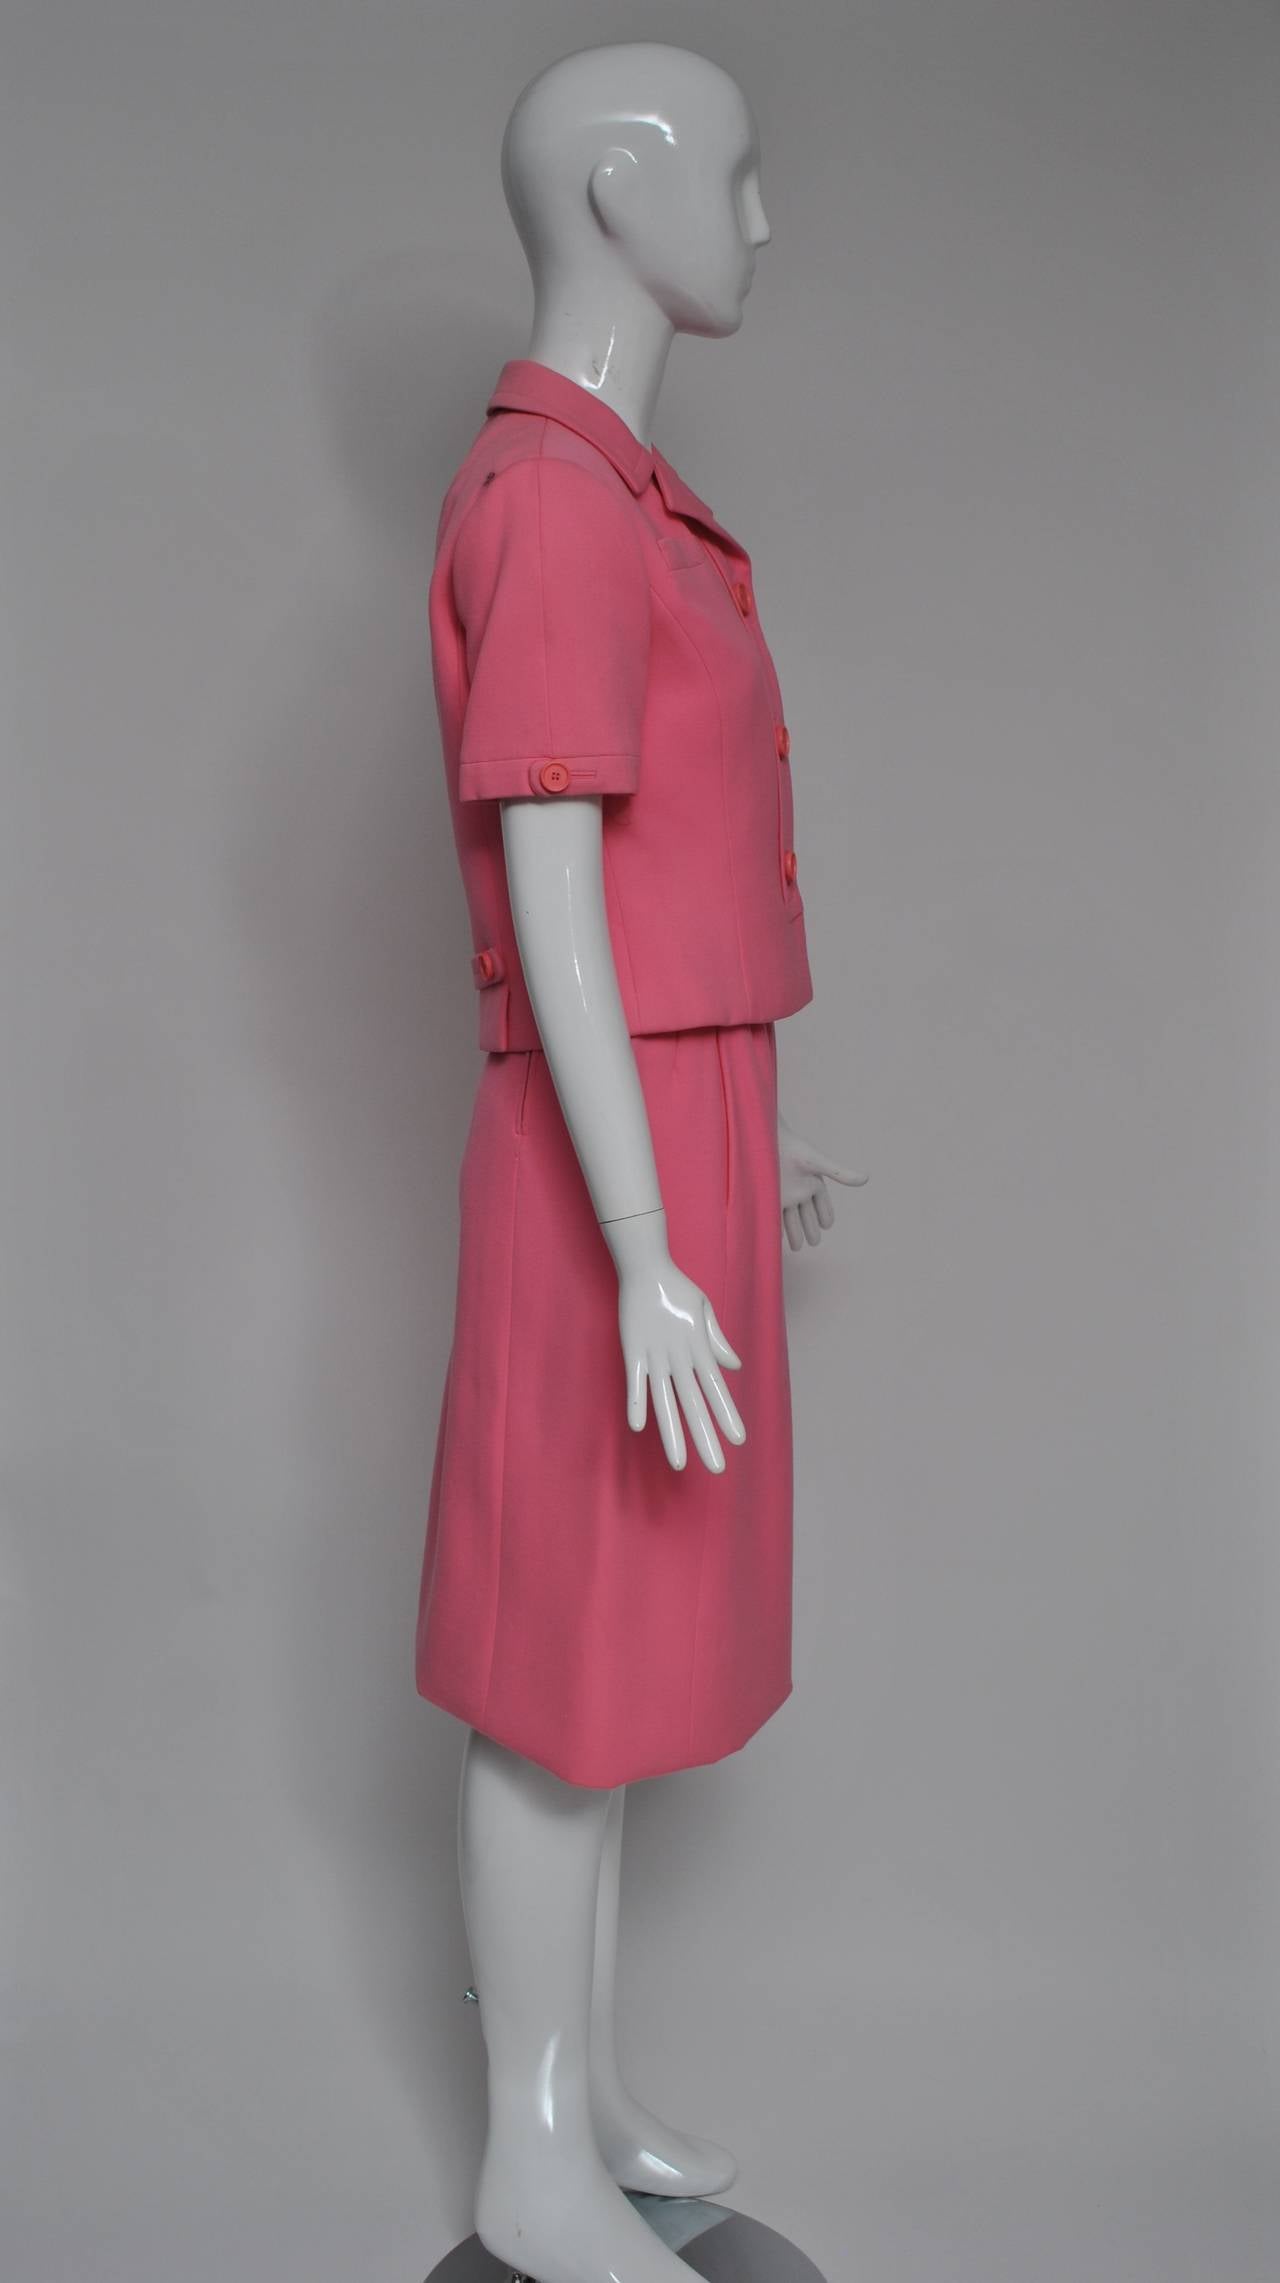 Beautifully tailored suit by Ben Zuckerman, who produced some of the best coats and suits in mid-twentieth-century America. Here is a spring suit from the 1960s in bright pink wool, the jacket with short sleeves, placket detail down the front and